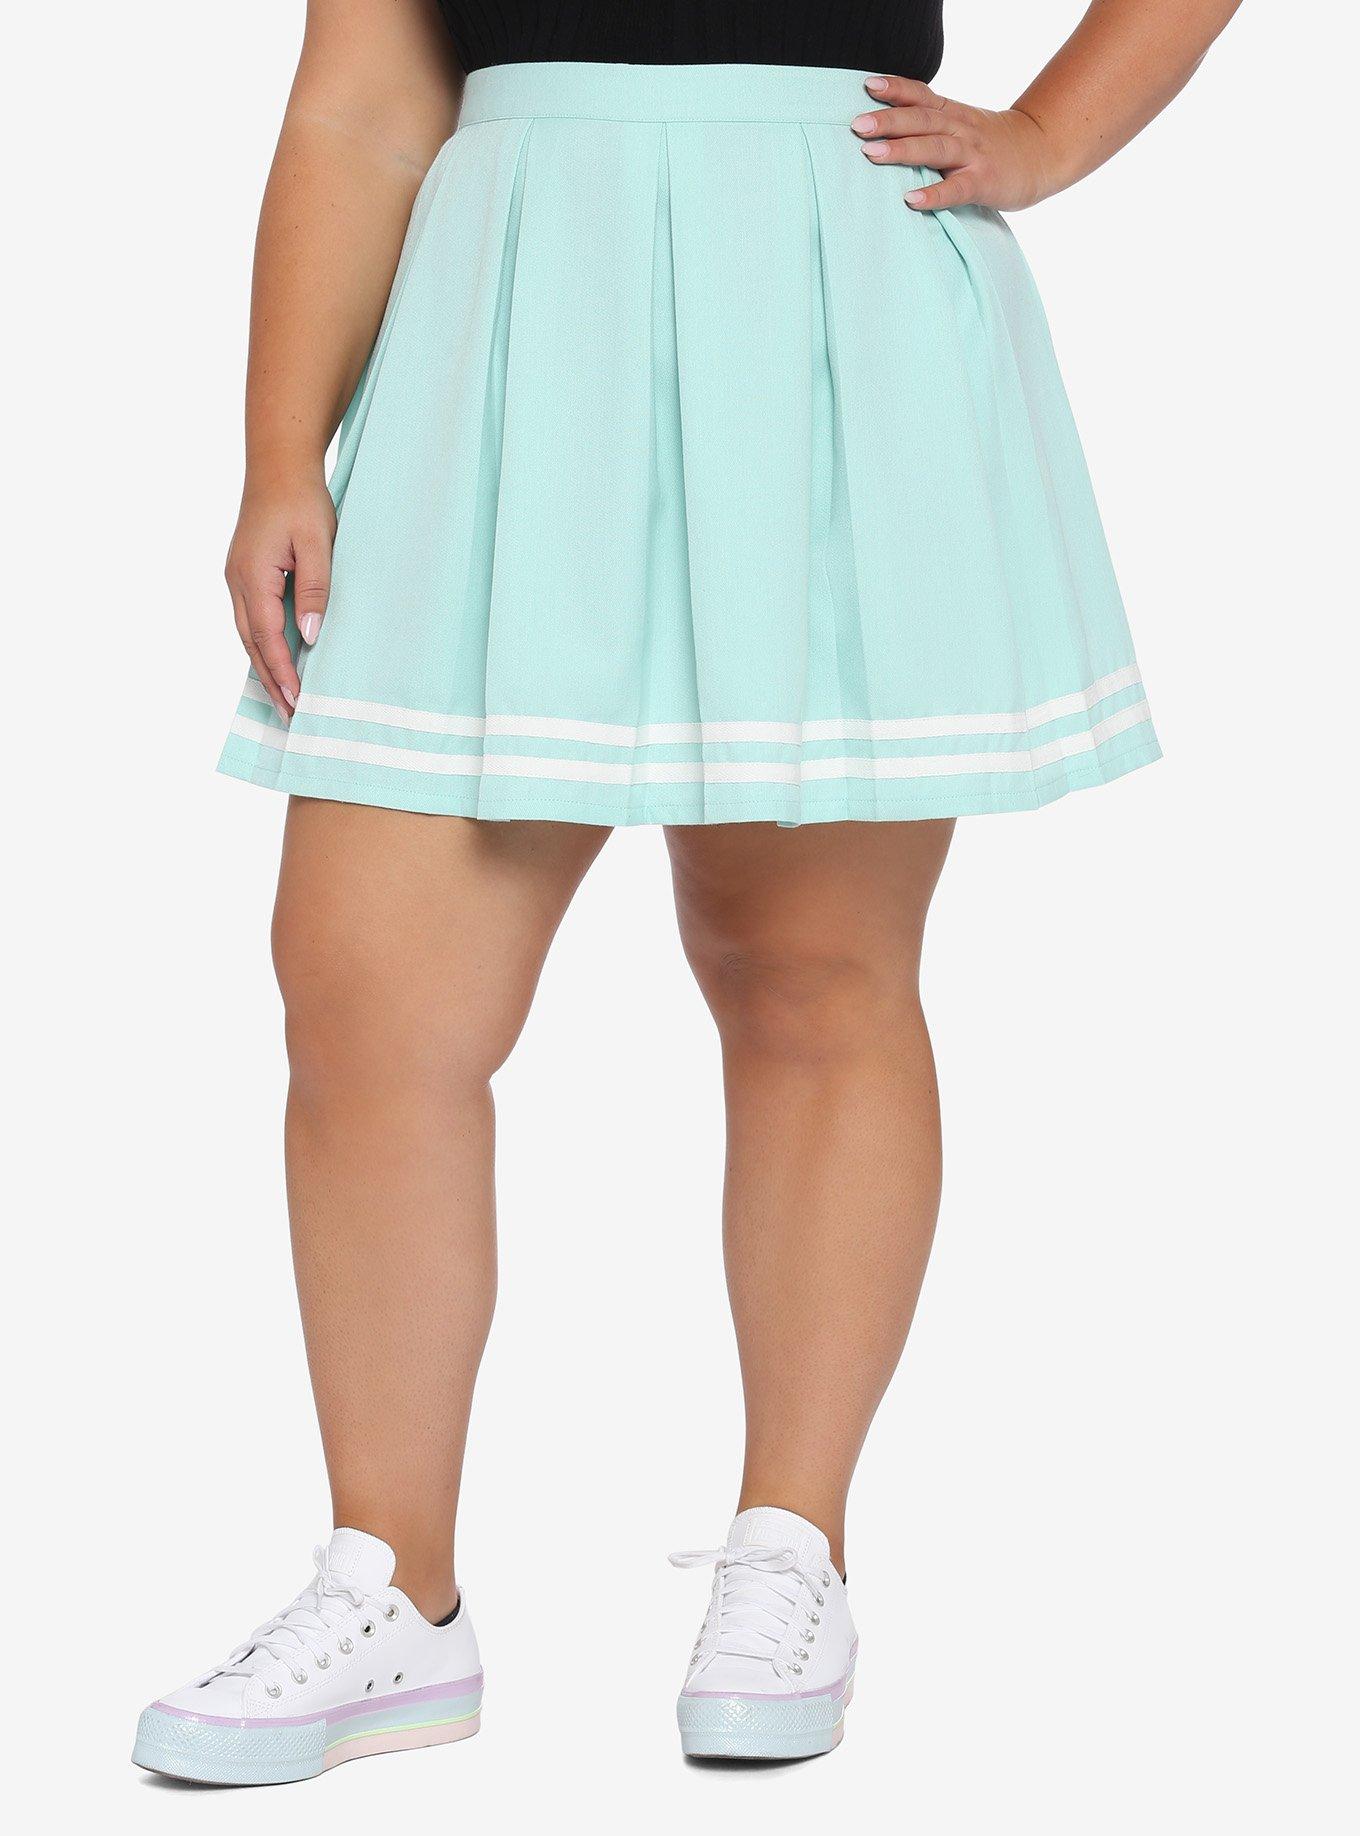 Mint Pleated Cheer Skirt Plus Size, MINT, hi-res